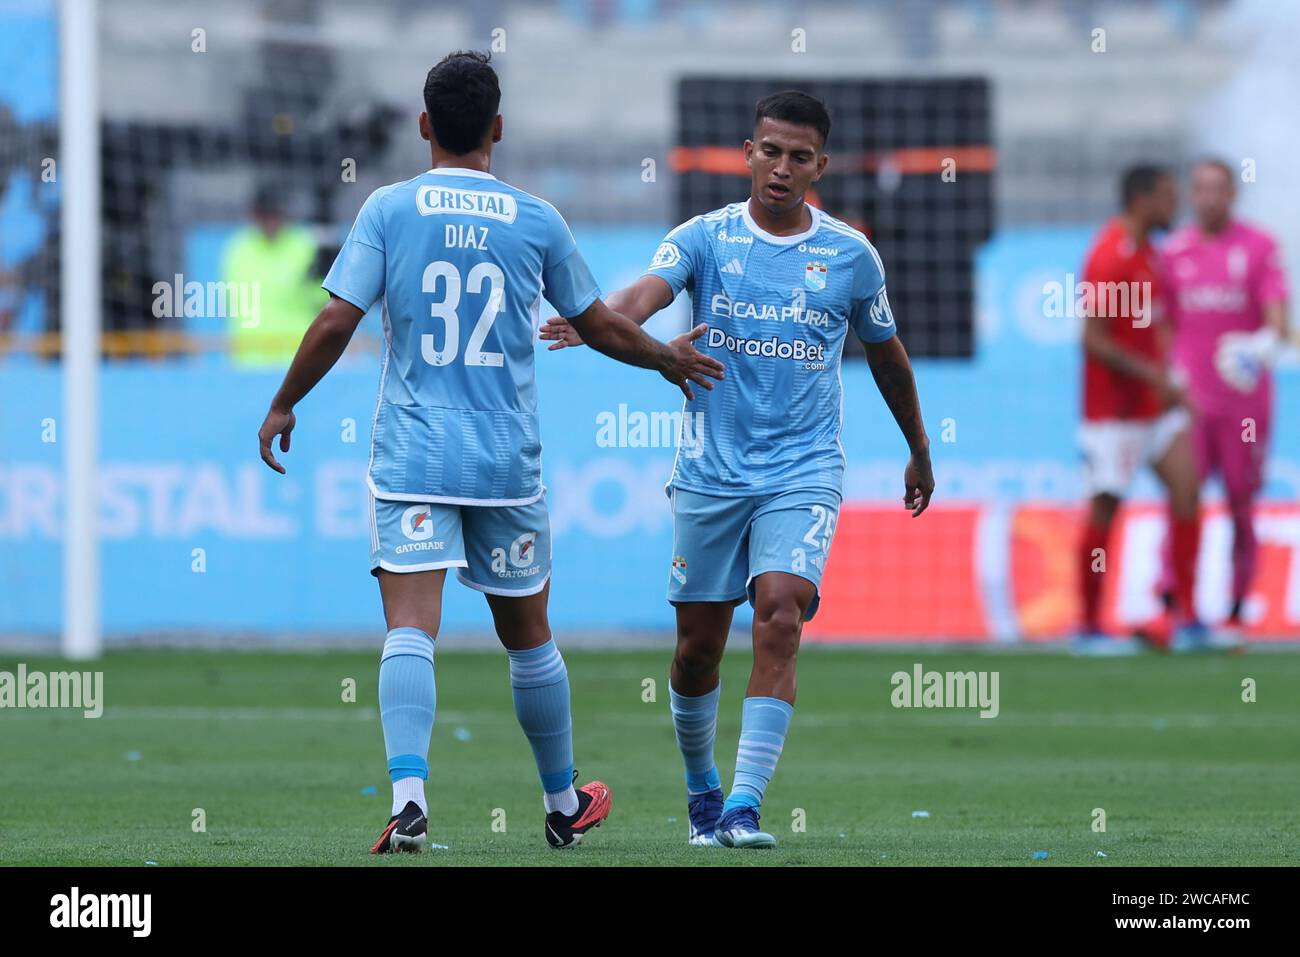 Lima, Peru. 14th Jan, 2024. Leonardo Diaz and Martin Tavara of Sporting Cristal celebrating goal during the friendly match between Sporting Cristal and Universidad Catolica de Chile played at Nacional Stadium on January 14, 2024 in Lima, Peru. (Photo by Miguel Marrufo/PRESSINPHOTO) Credit: PRESSINPHOTO SPORTS AGENCY/Alamy Live News Stock Photo